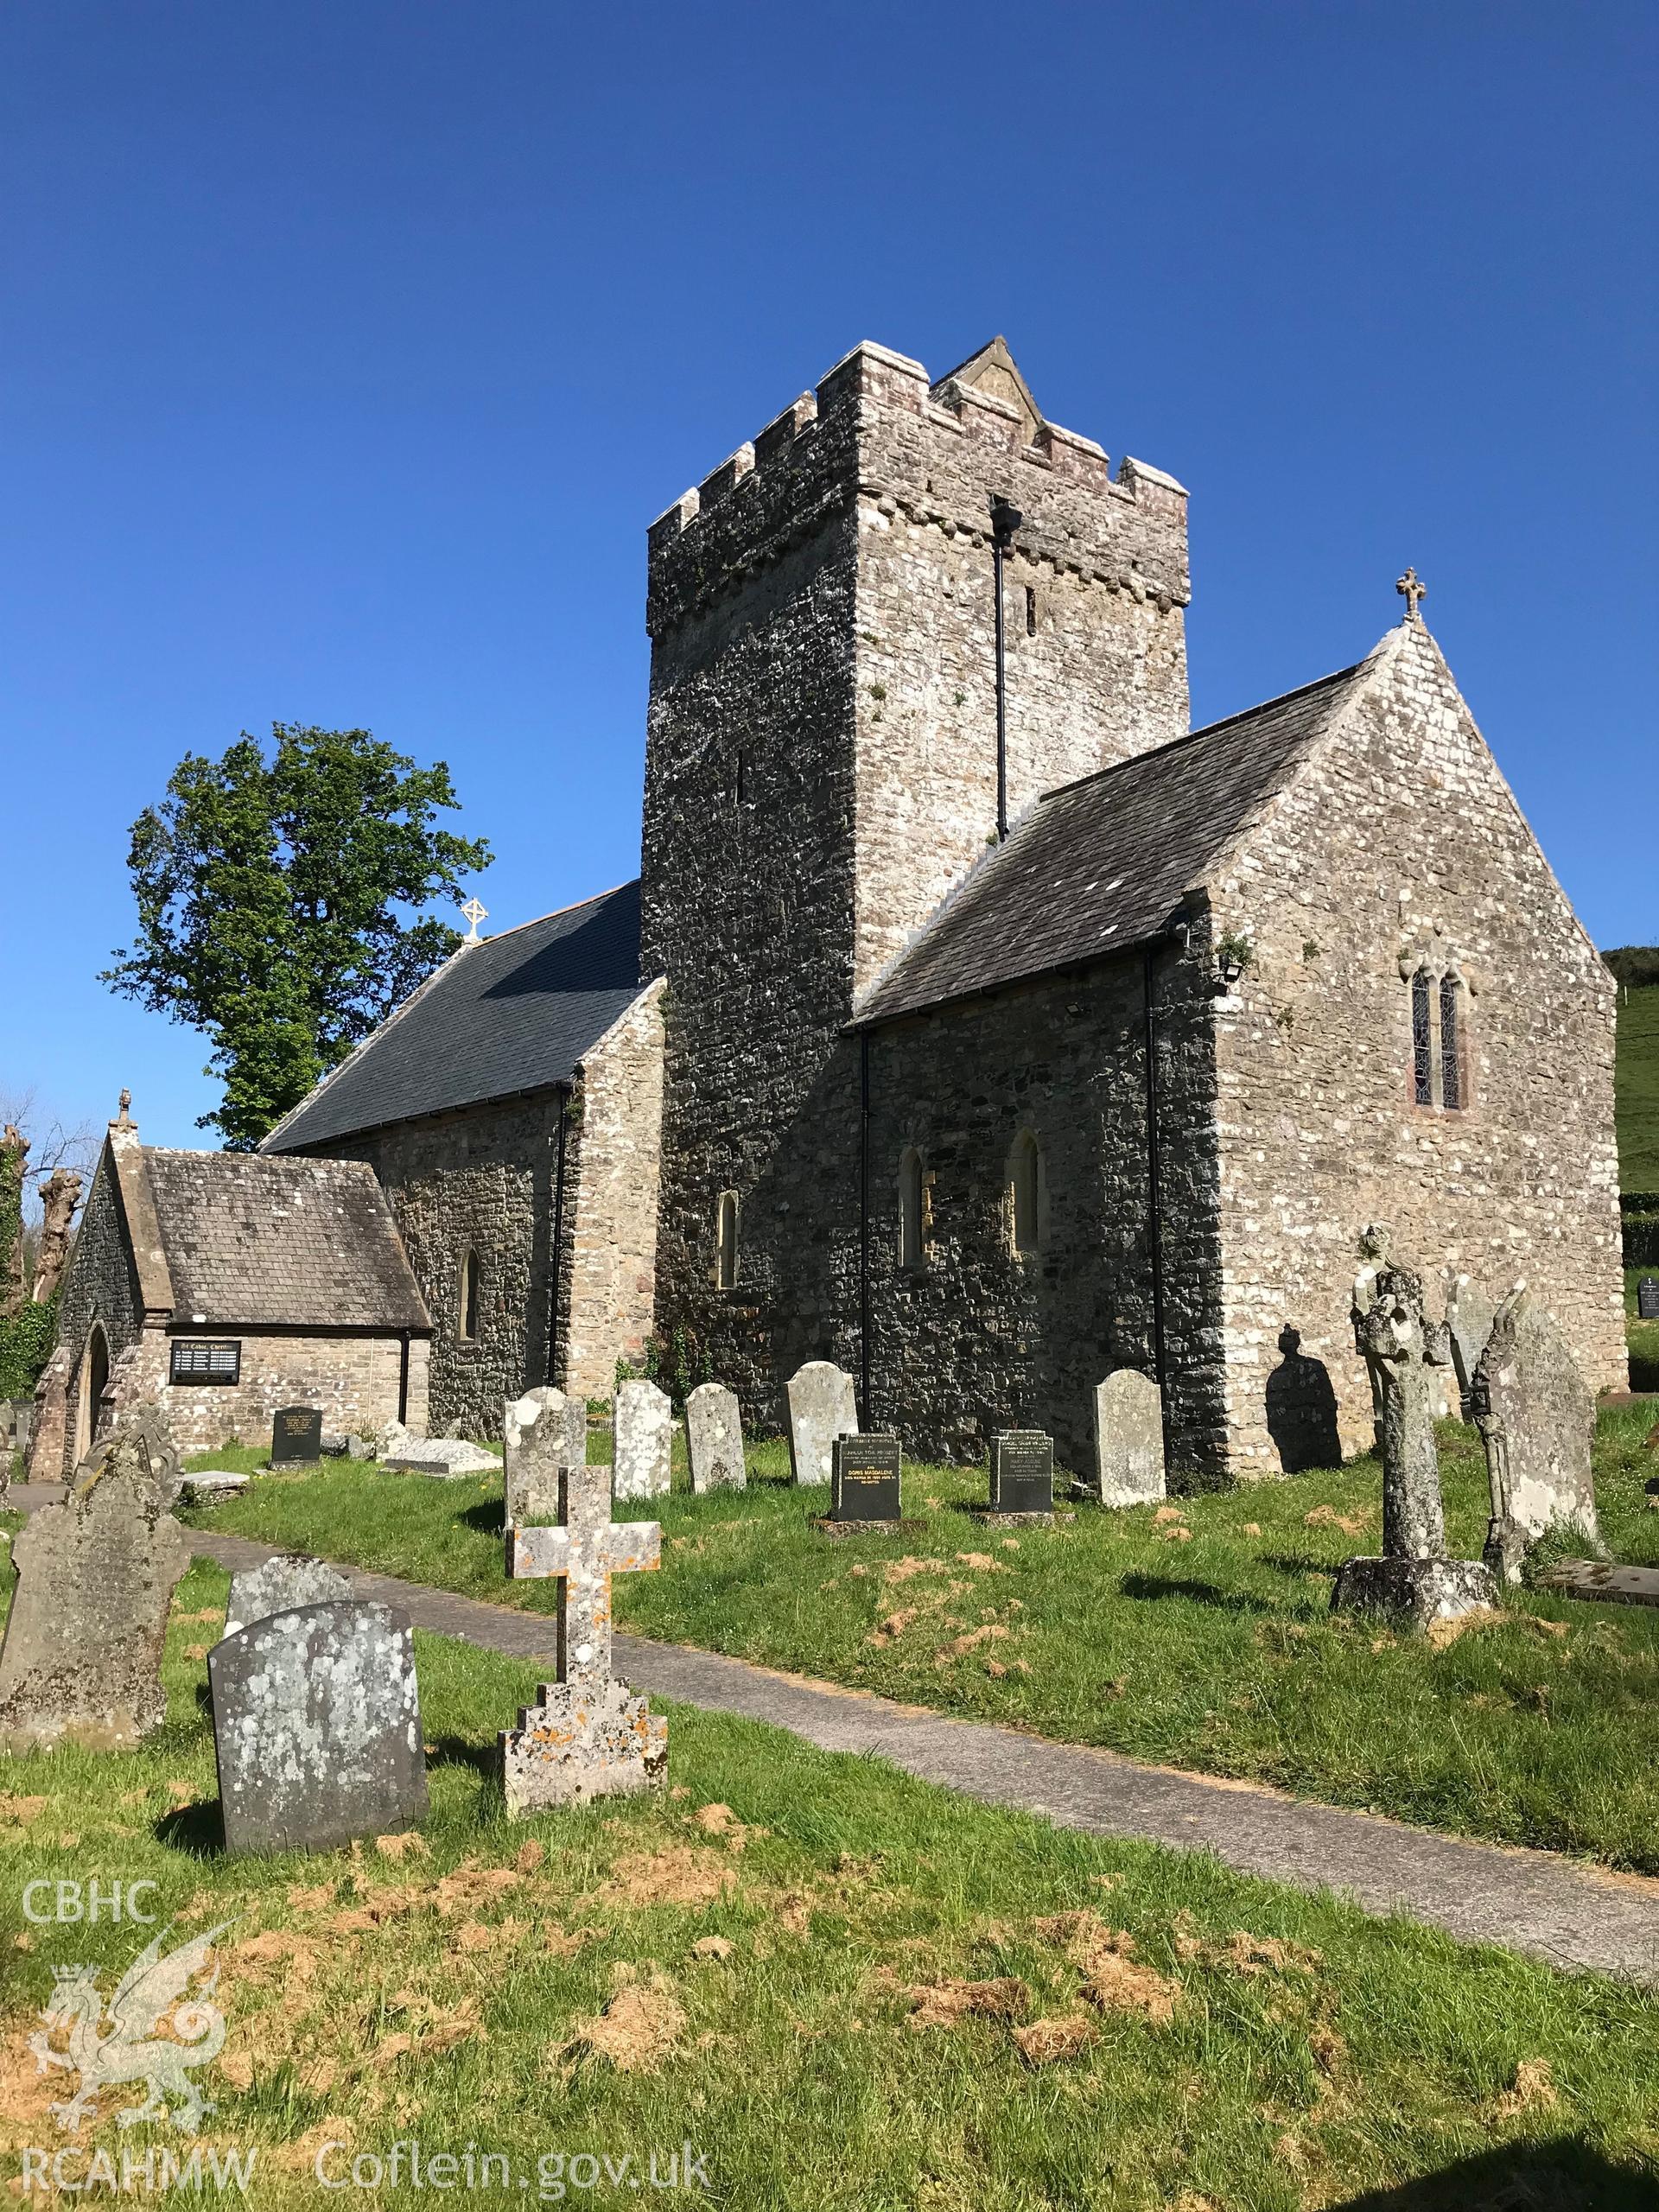 Digital colour photograph showing exterior view of St. Cadog's Church, Cheriton, taken by Paul R. Davis on 5th May 2019.